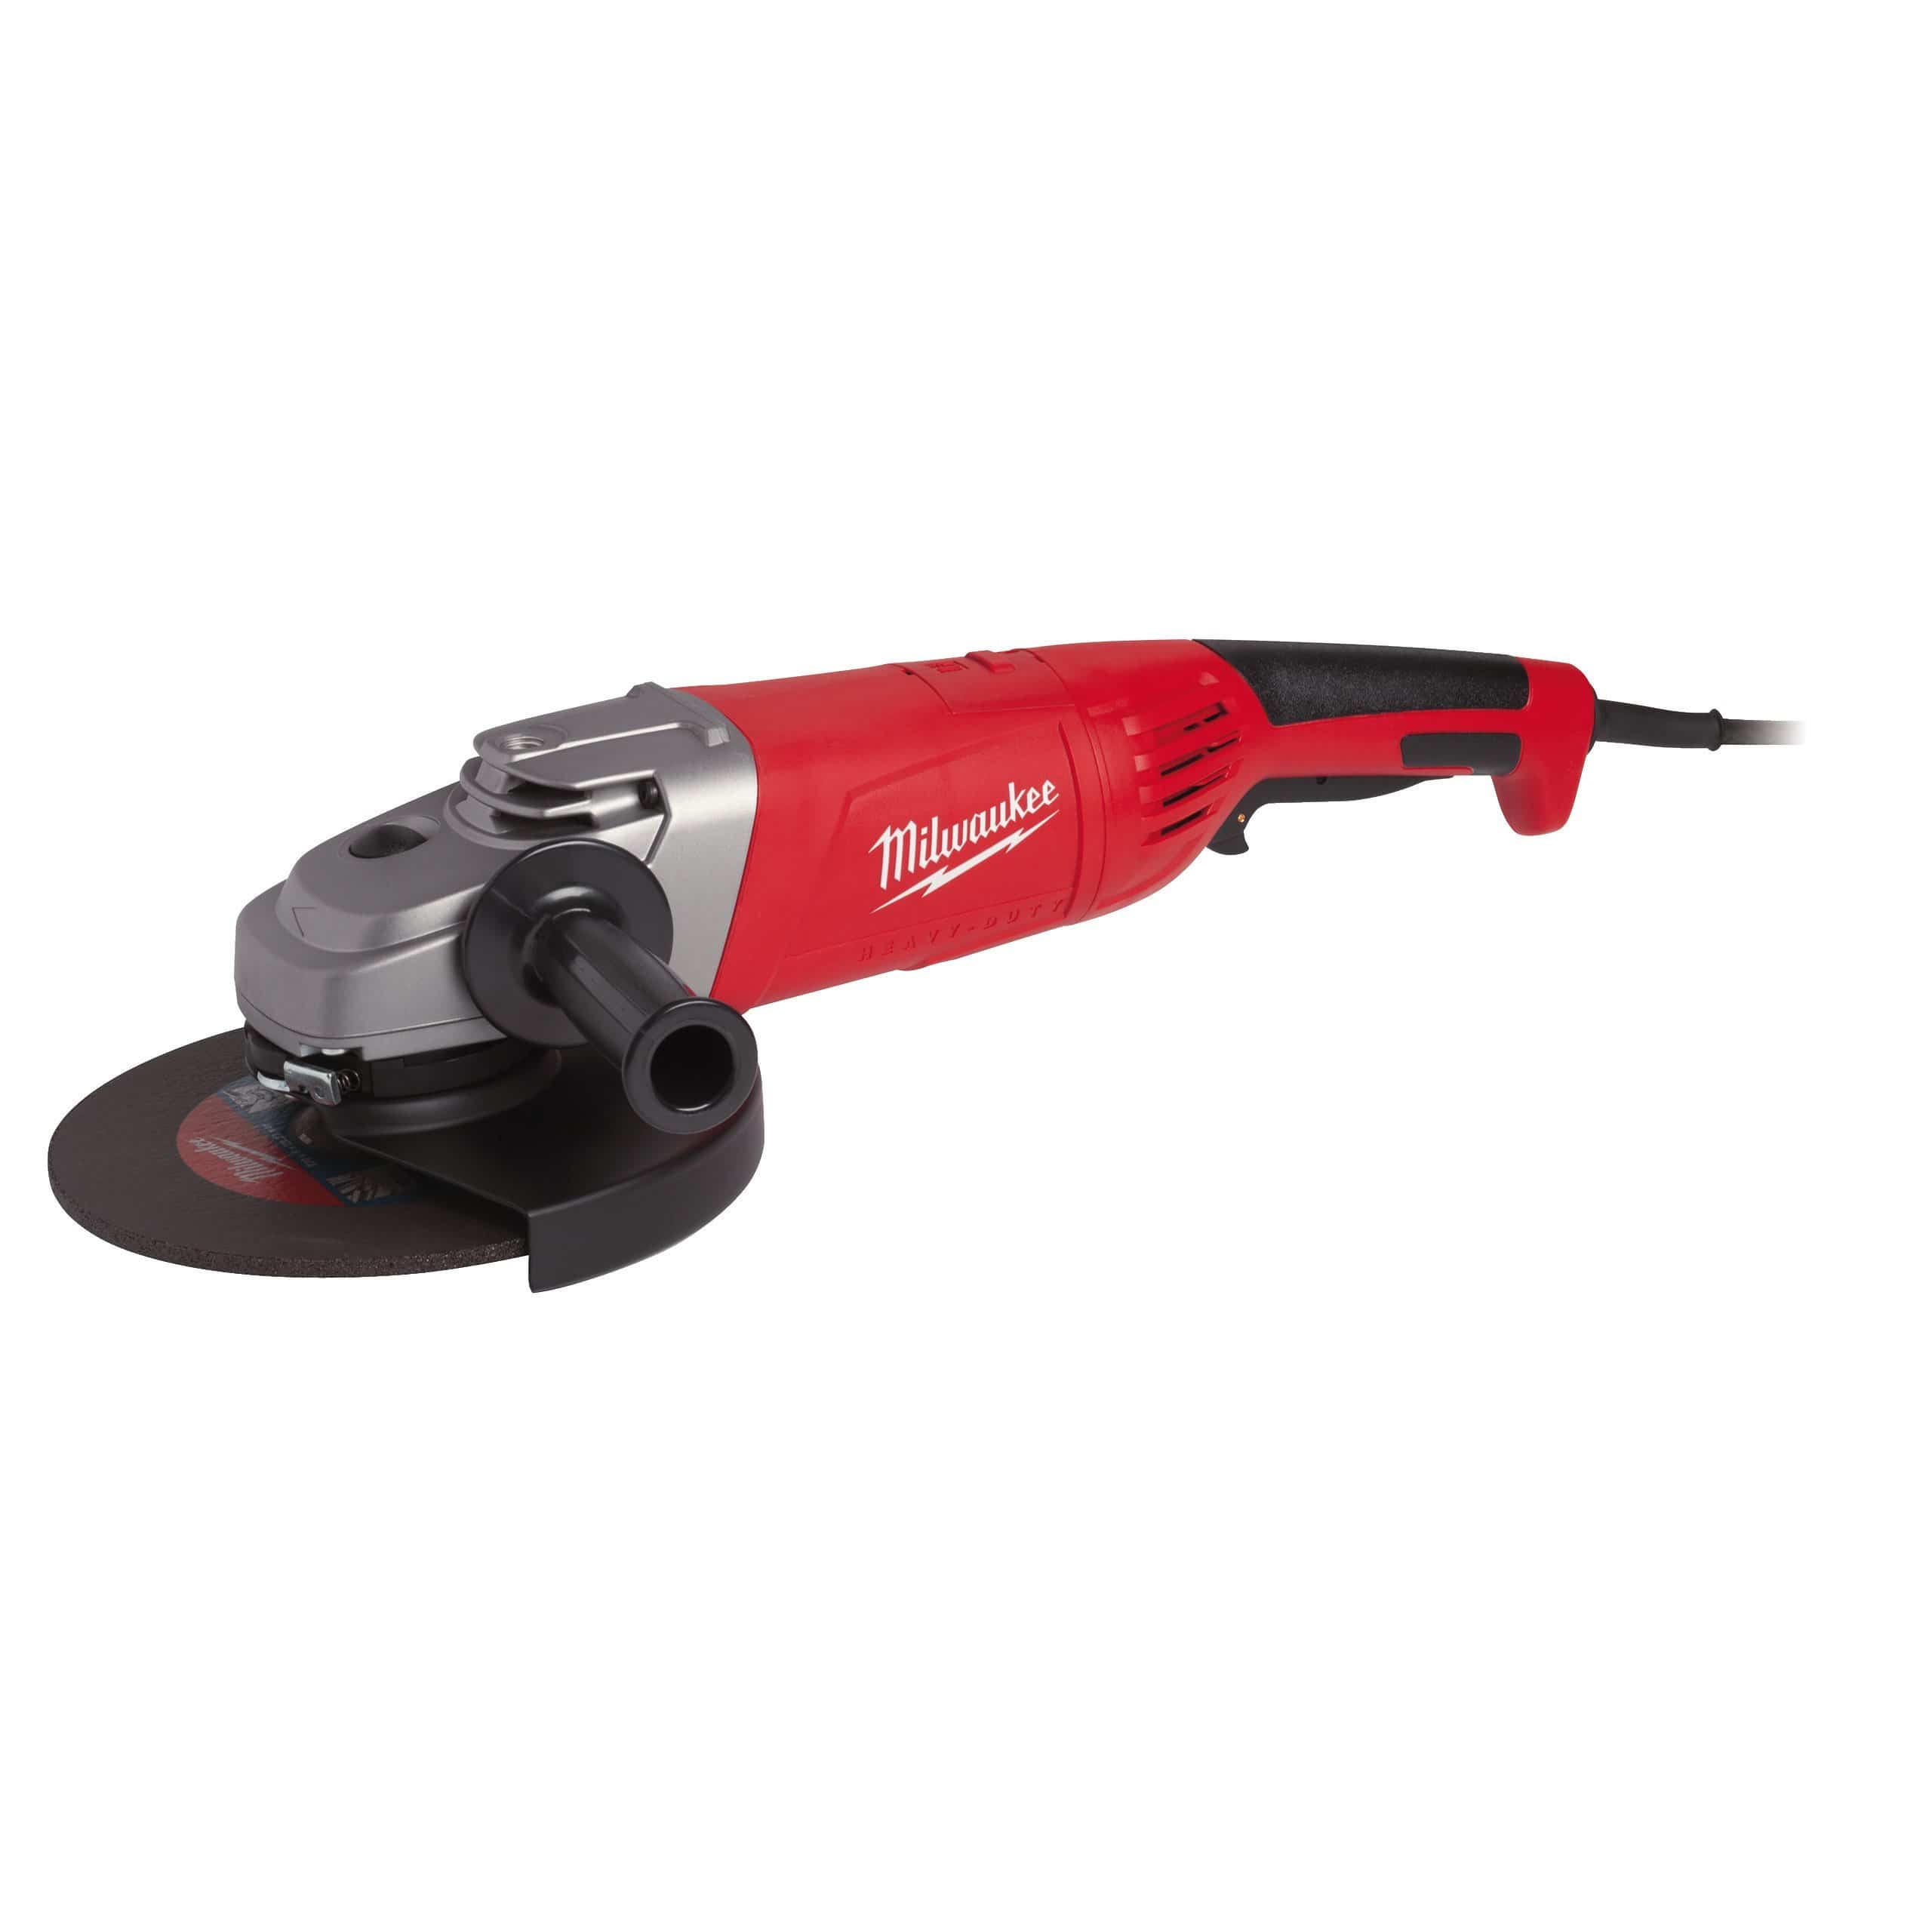 Milwaukee Angle Grinder 230mm 2400W - AG 24-230 E | Supply Master | Accra, Ghana Tools Building Steel Engineering Hardware tool